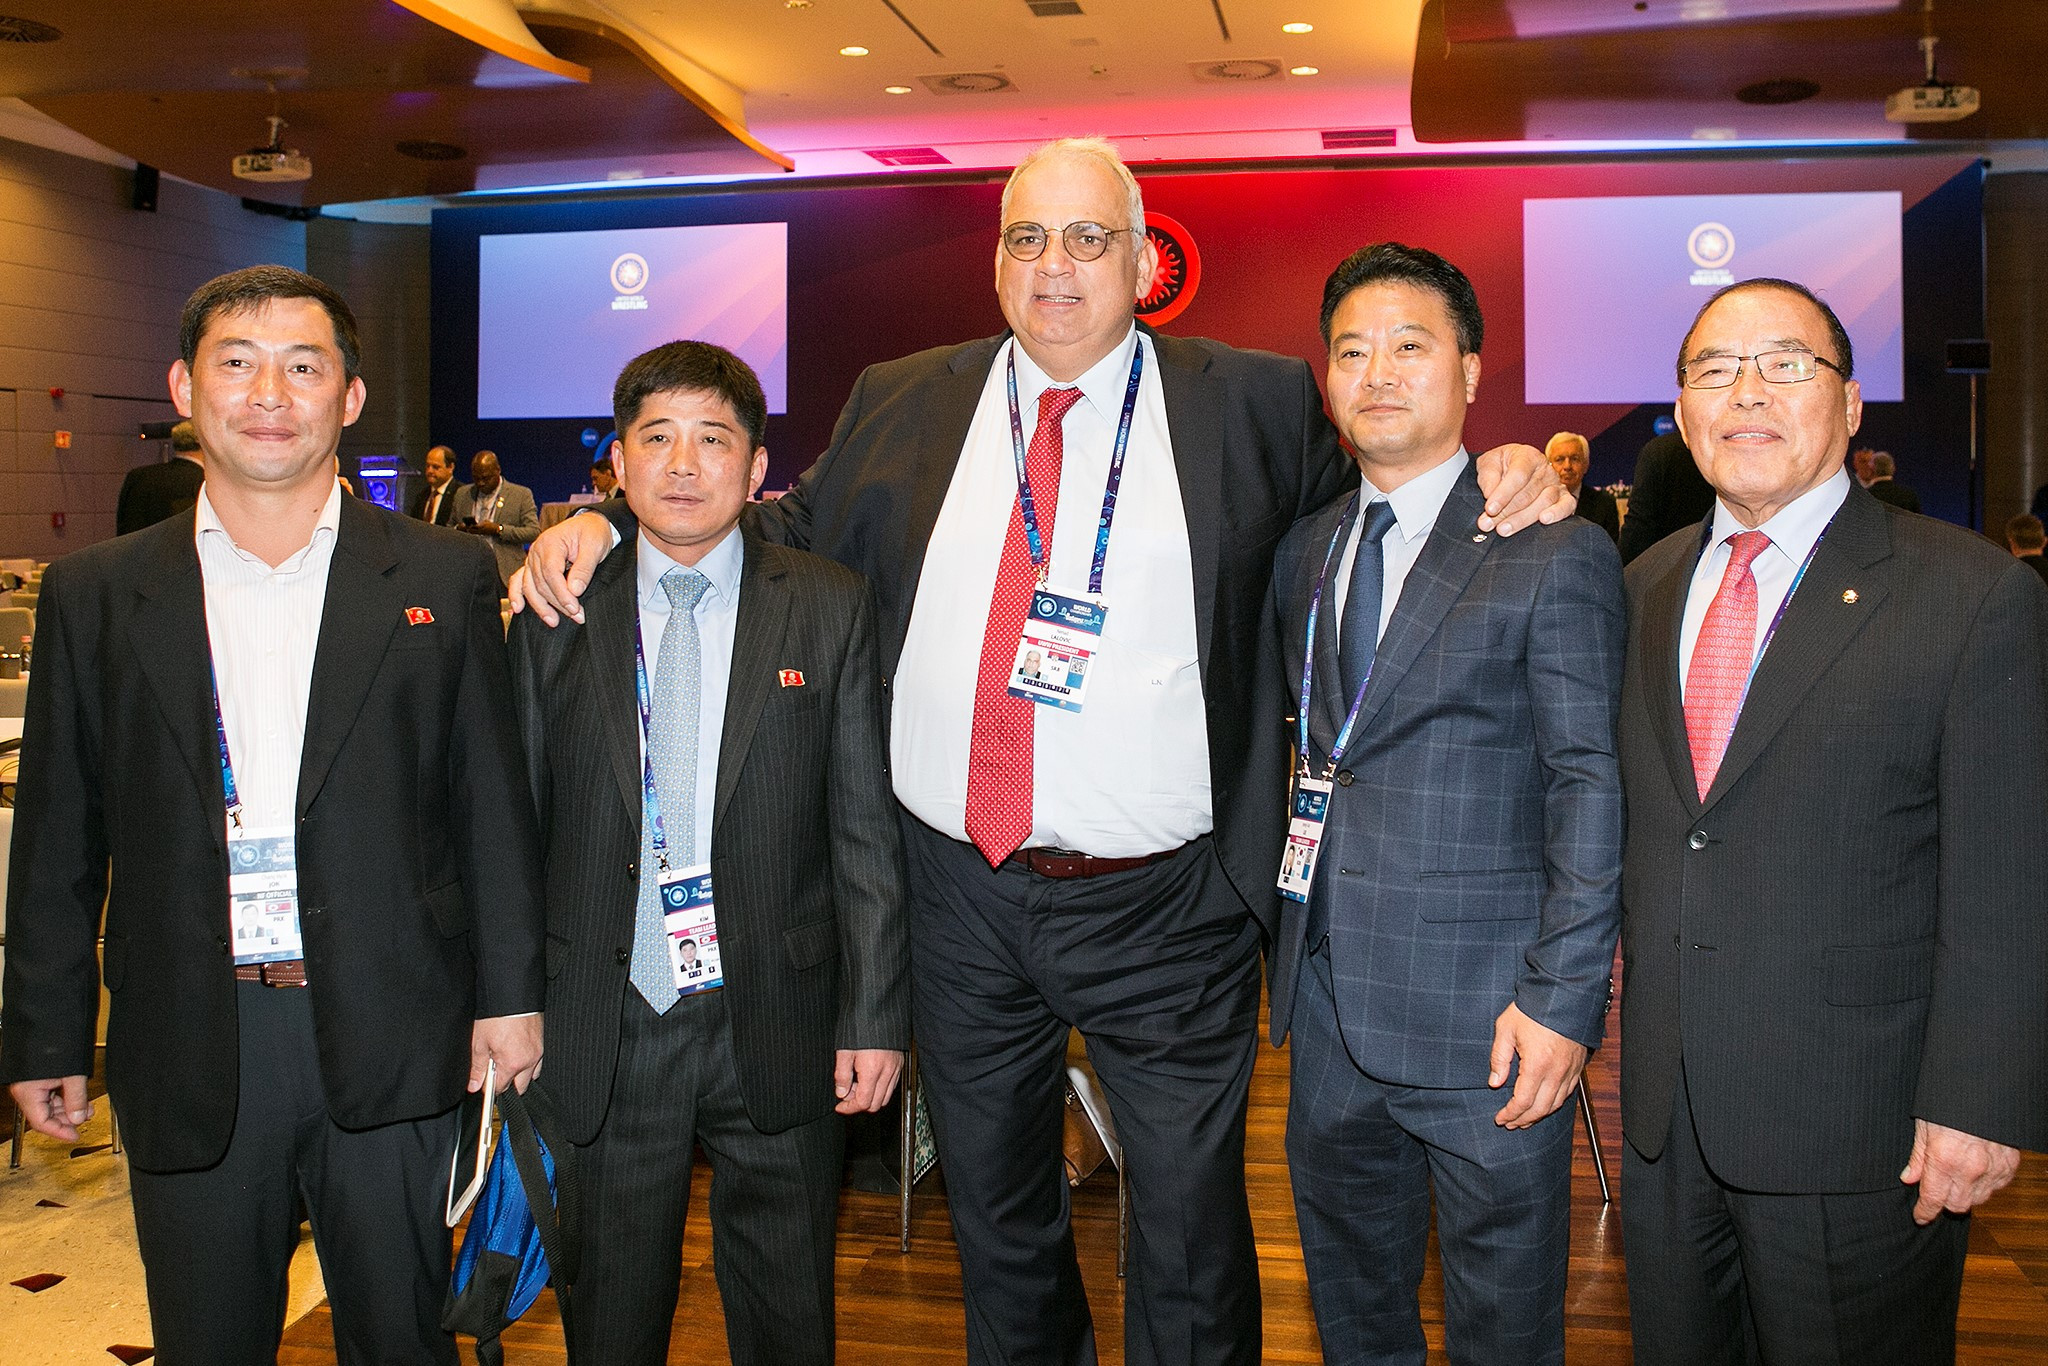 During the Congress UWW President Nenad Lalovic, centre, oversaw a handshake between representatives from North and South Korea ©UWW